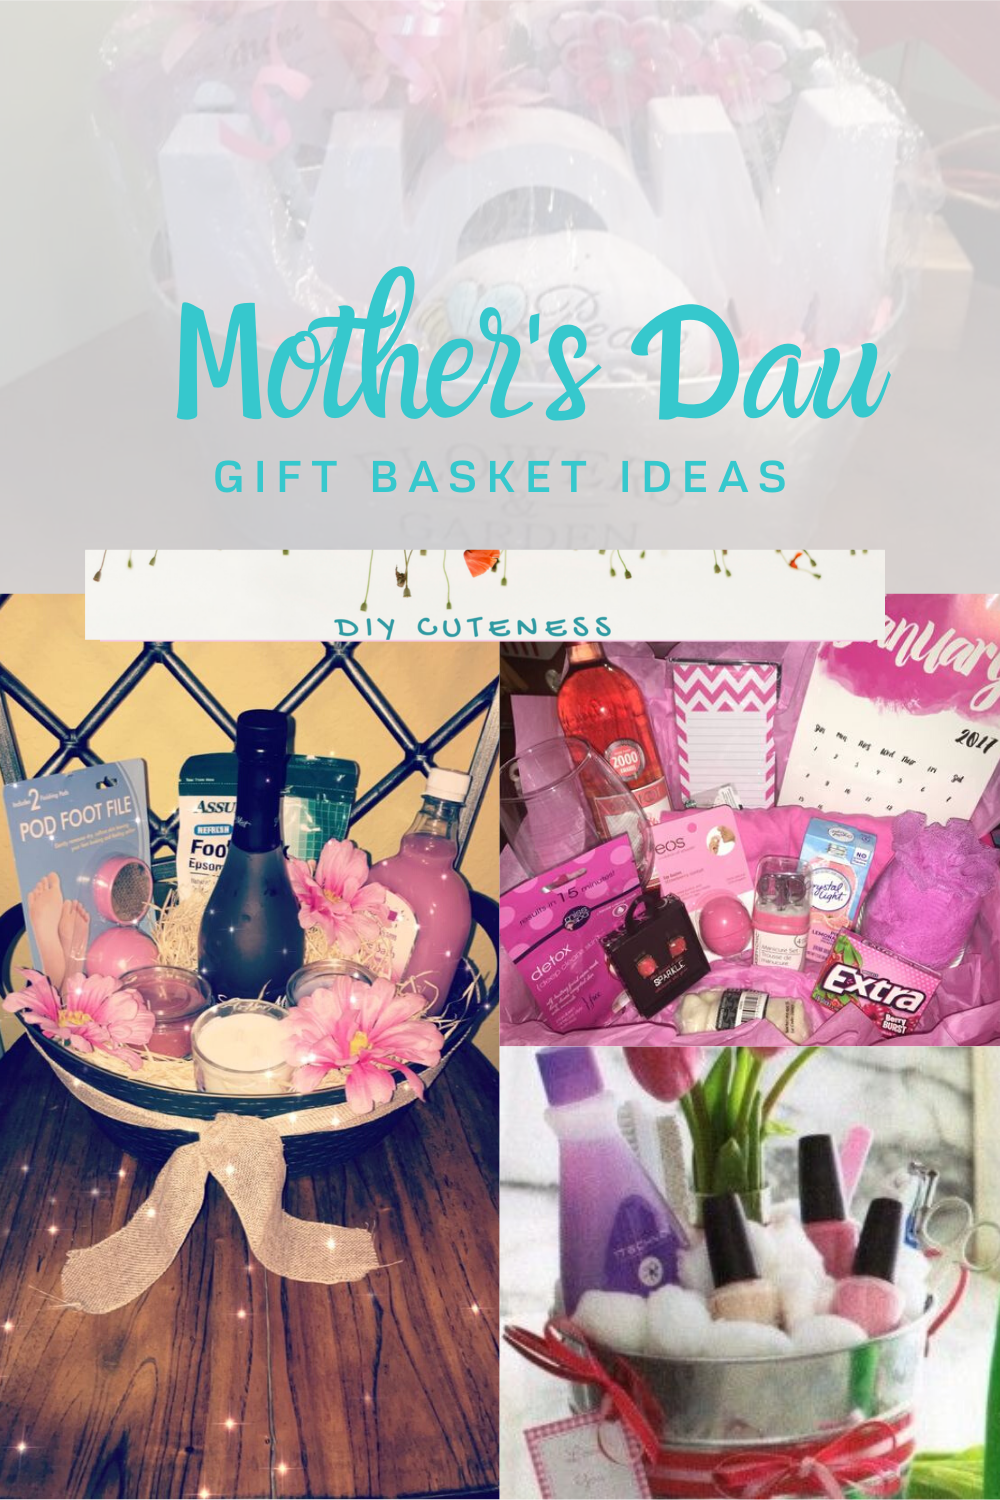 Why Gift Baskets Might Be Your Best Option for Mother's Day - InsideHook